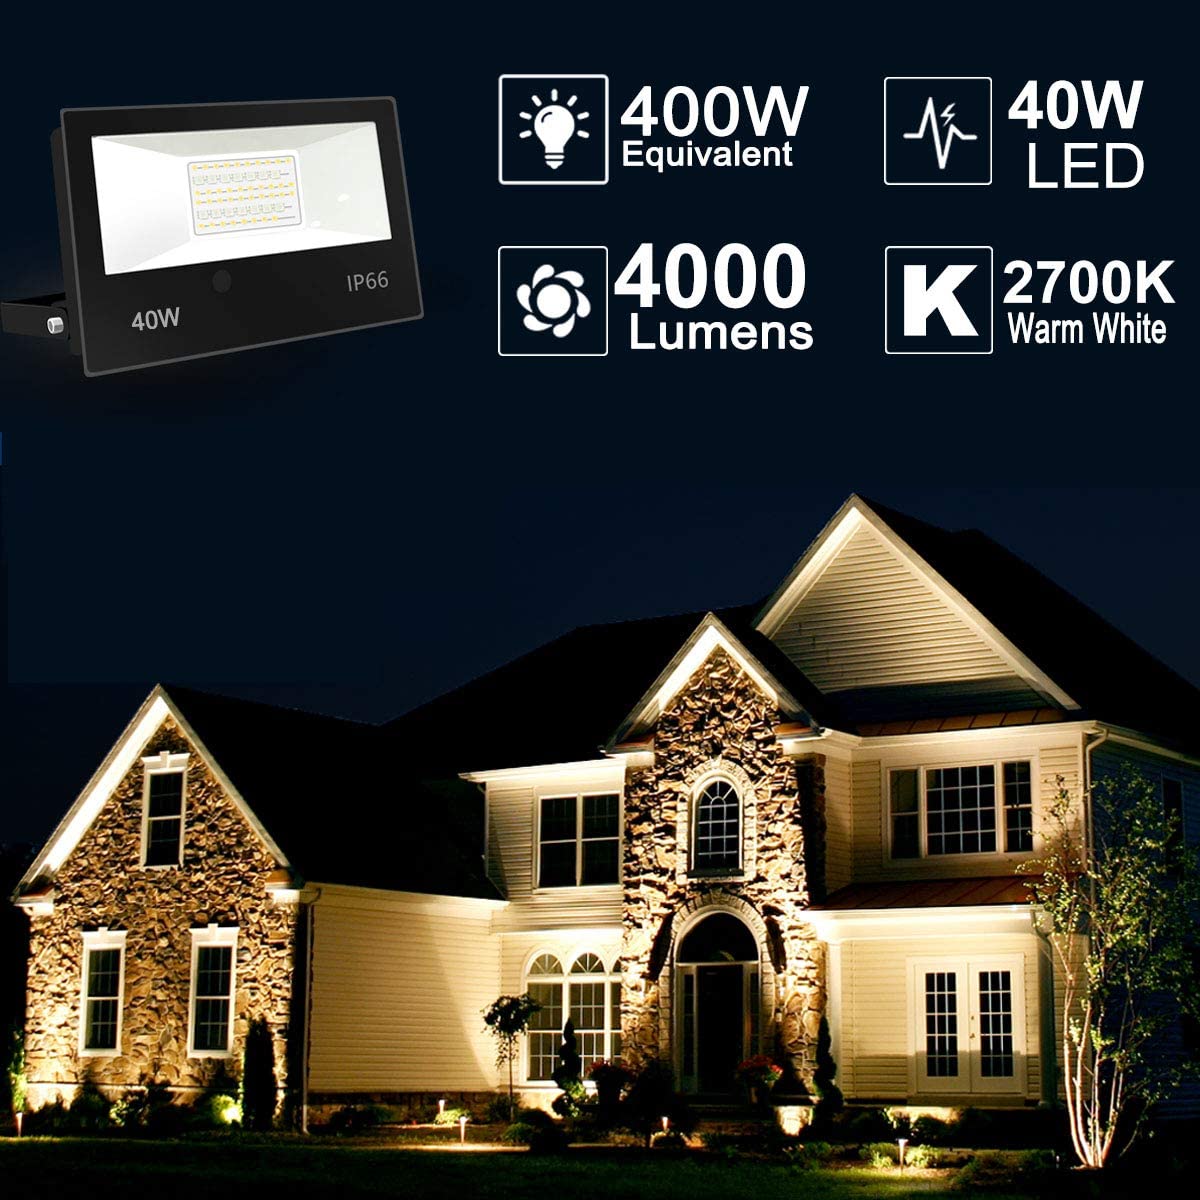 HEKEE LED Flood Light Outdoor, 400W Equivalent RGB Color Changing Floo